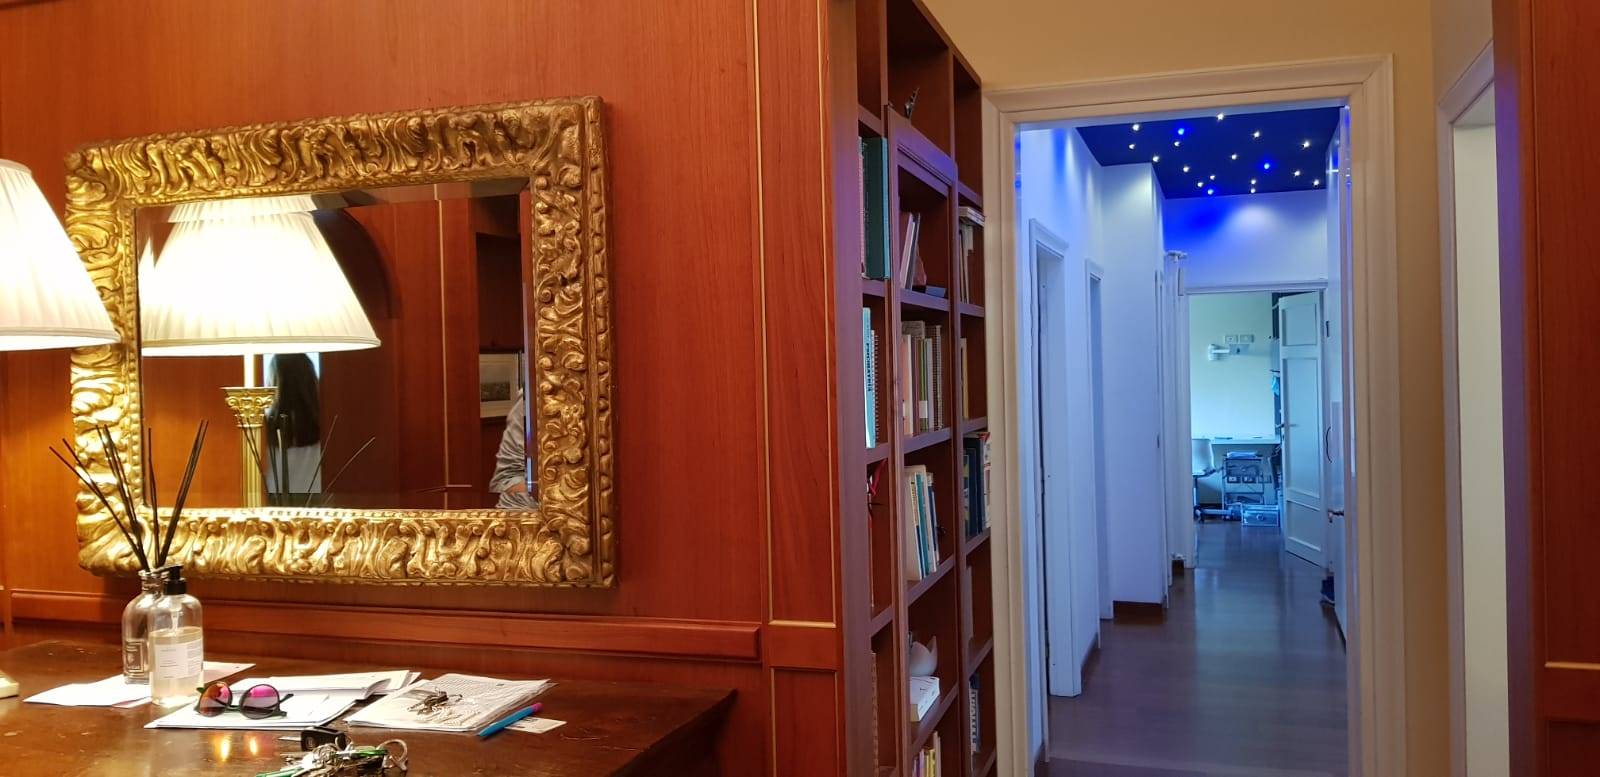 SAVONAROLA, FIRENZE, Apartment for sale, Excellent Condition, Heating Individual heating system, Energetic class: G, Epi: 278 kwh/m2 year, placed at 